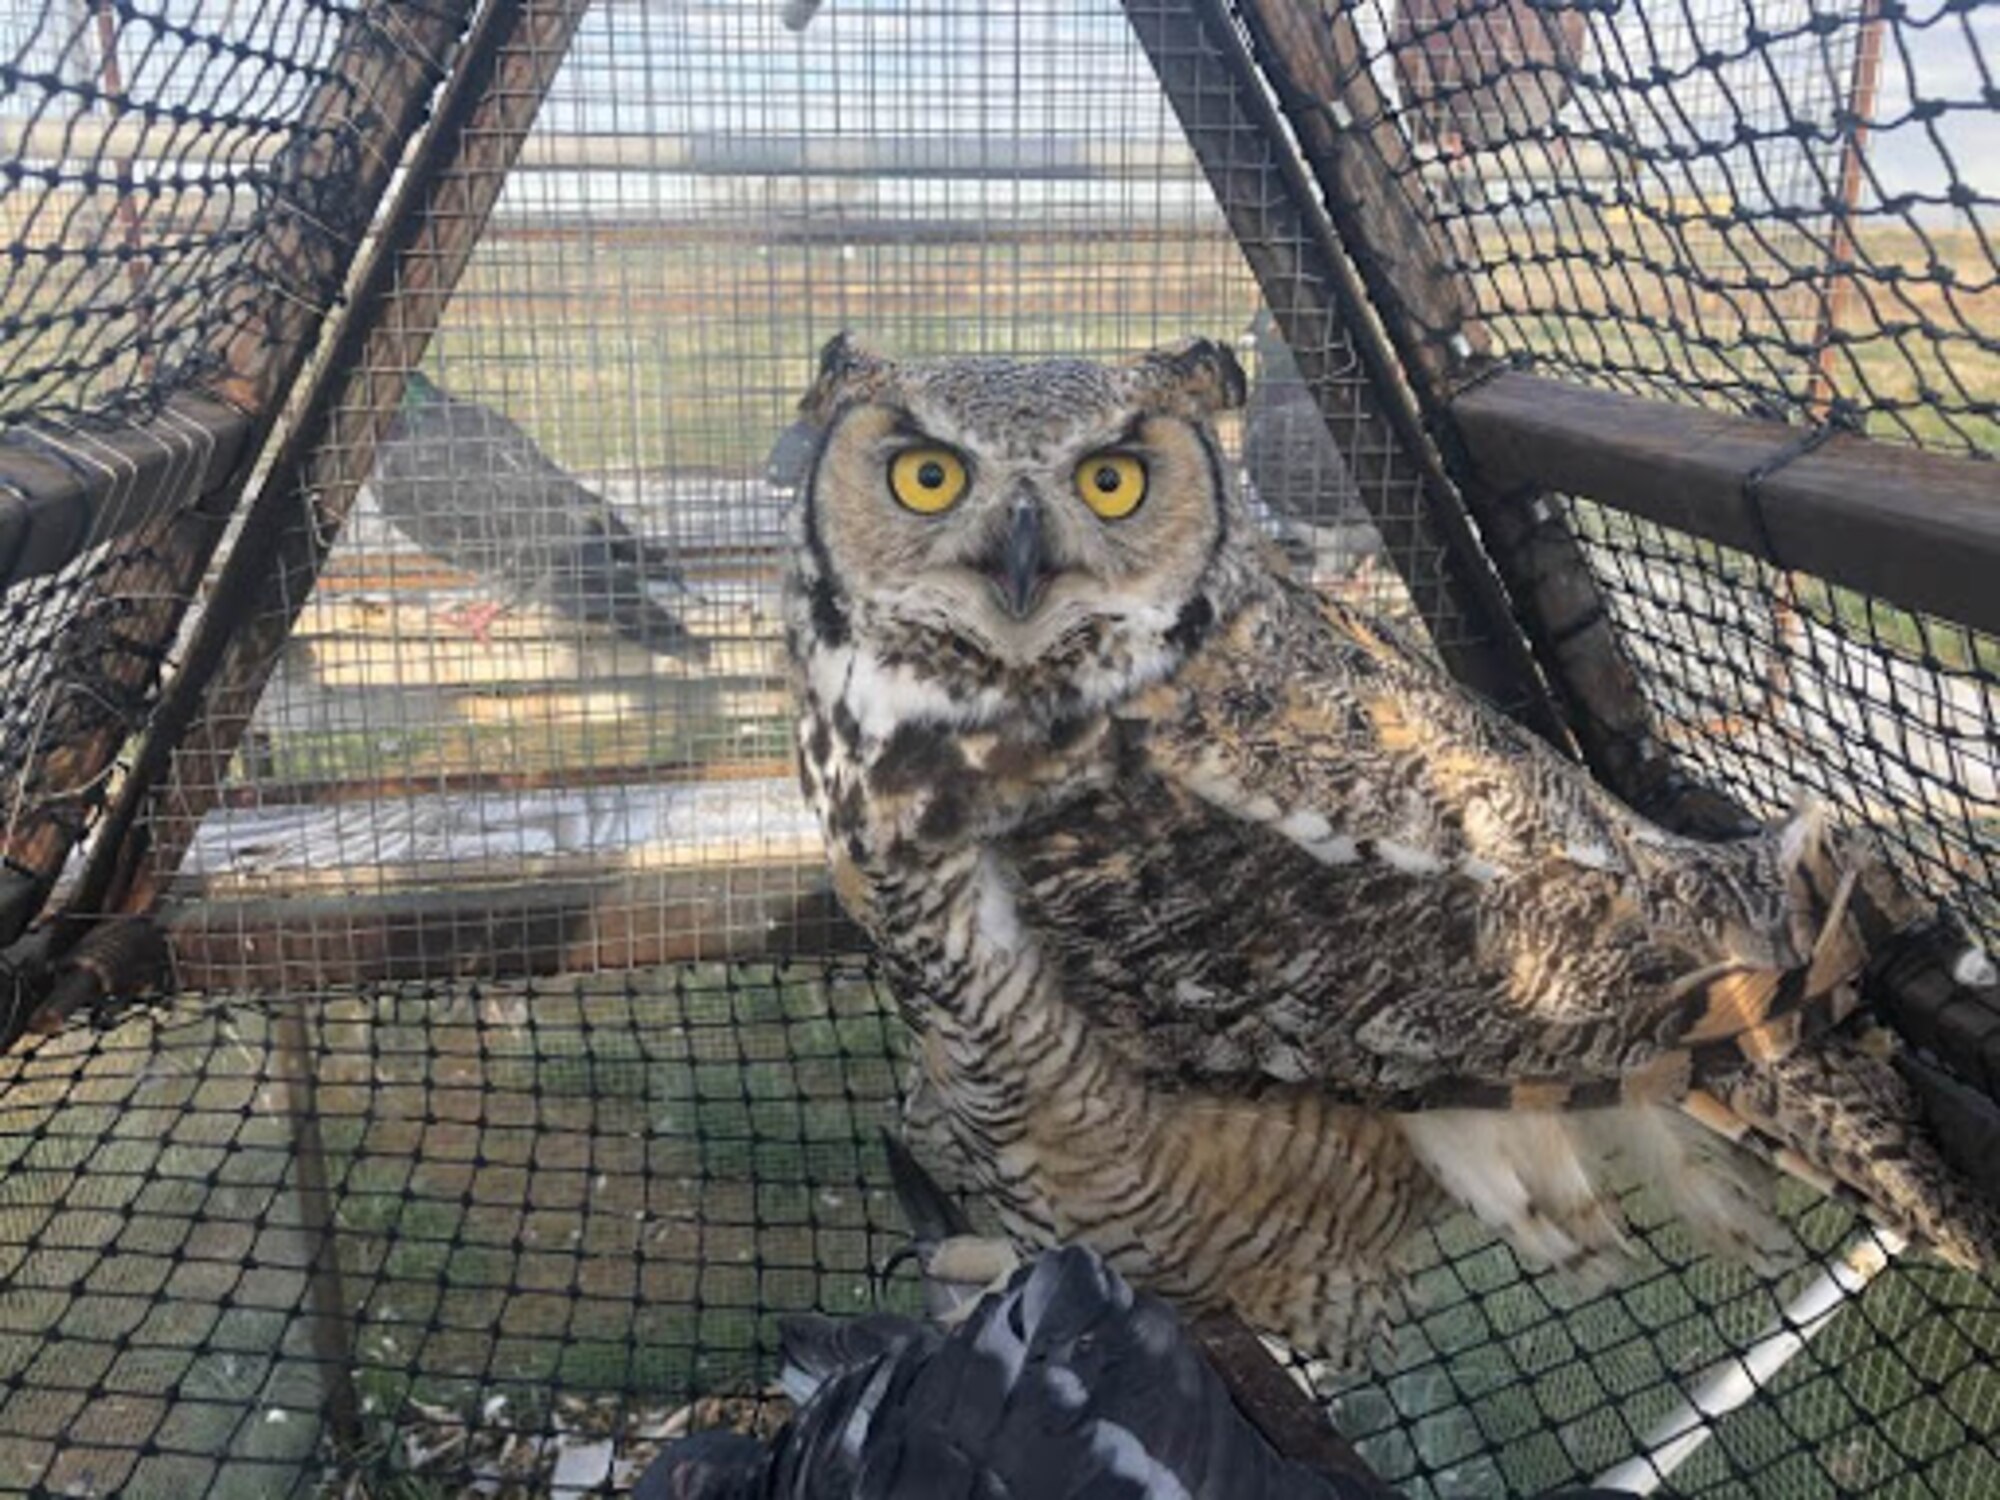 An owl is captured near the base's flight line. The bird will be taken to a new habitat as part of the Raptor Relocation Program, which focuses on trapping kestrels, hawks, owls, and other raptors and relocating the birds to safer and more suitable habitats away from the airfield. (Courtesy photo)